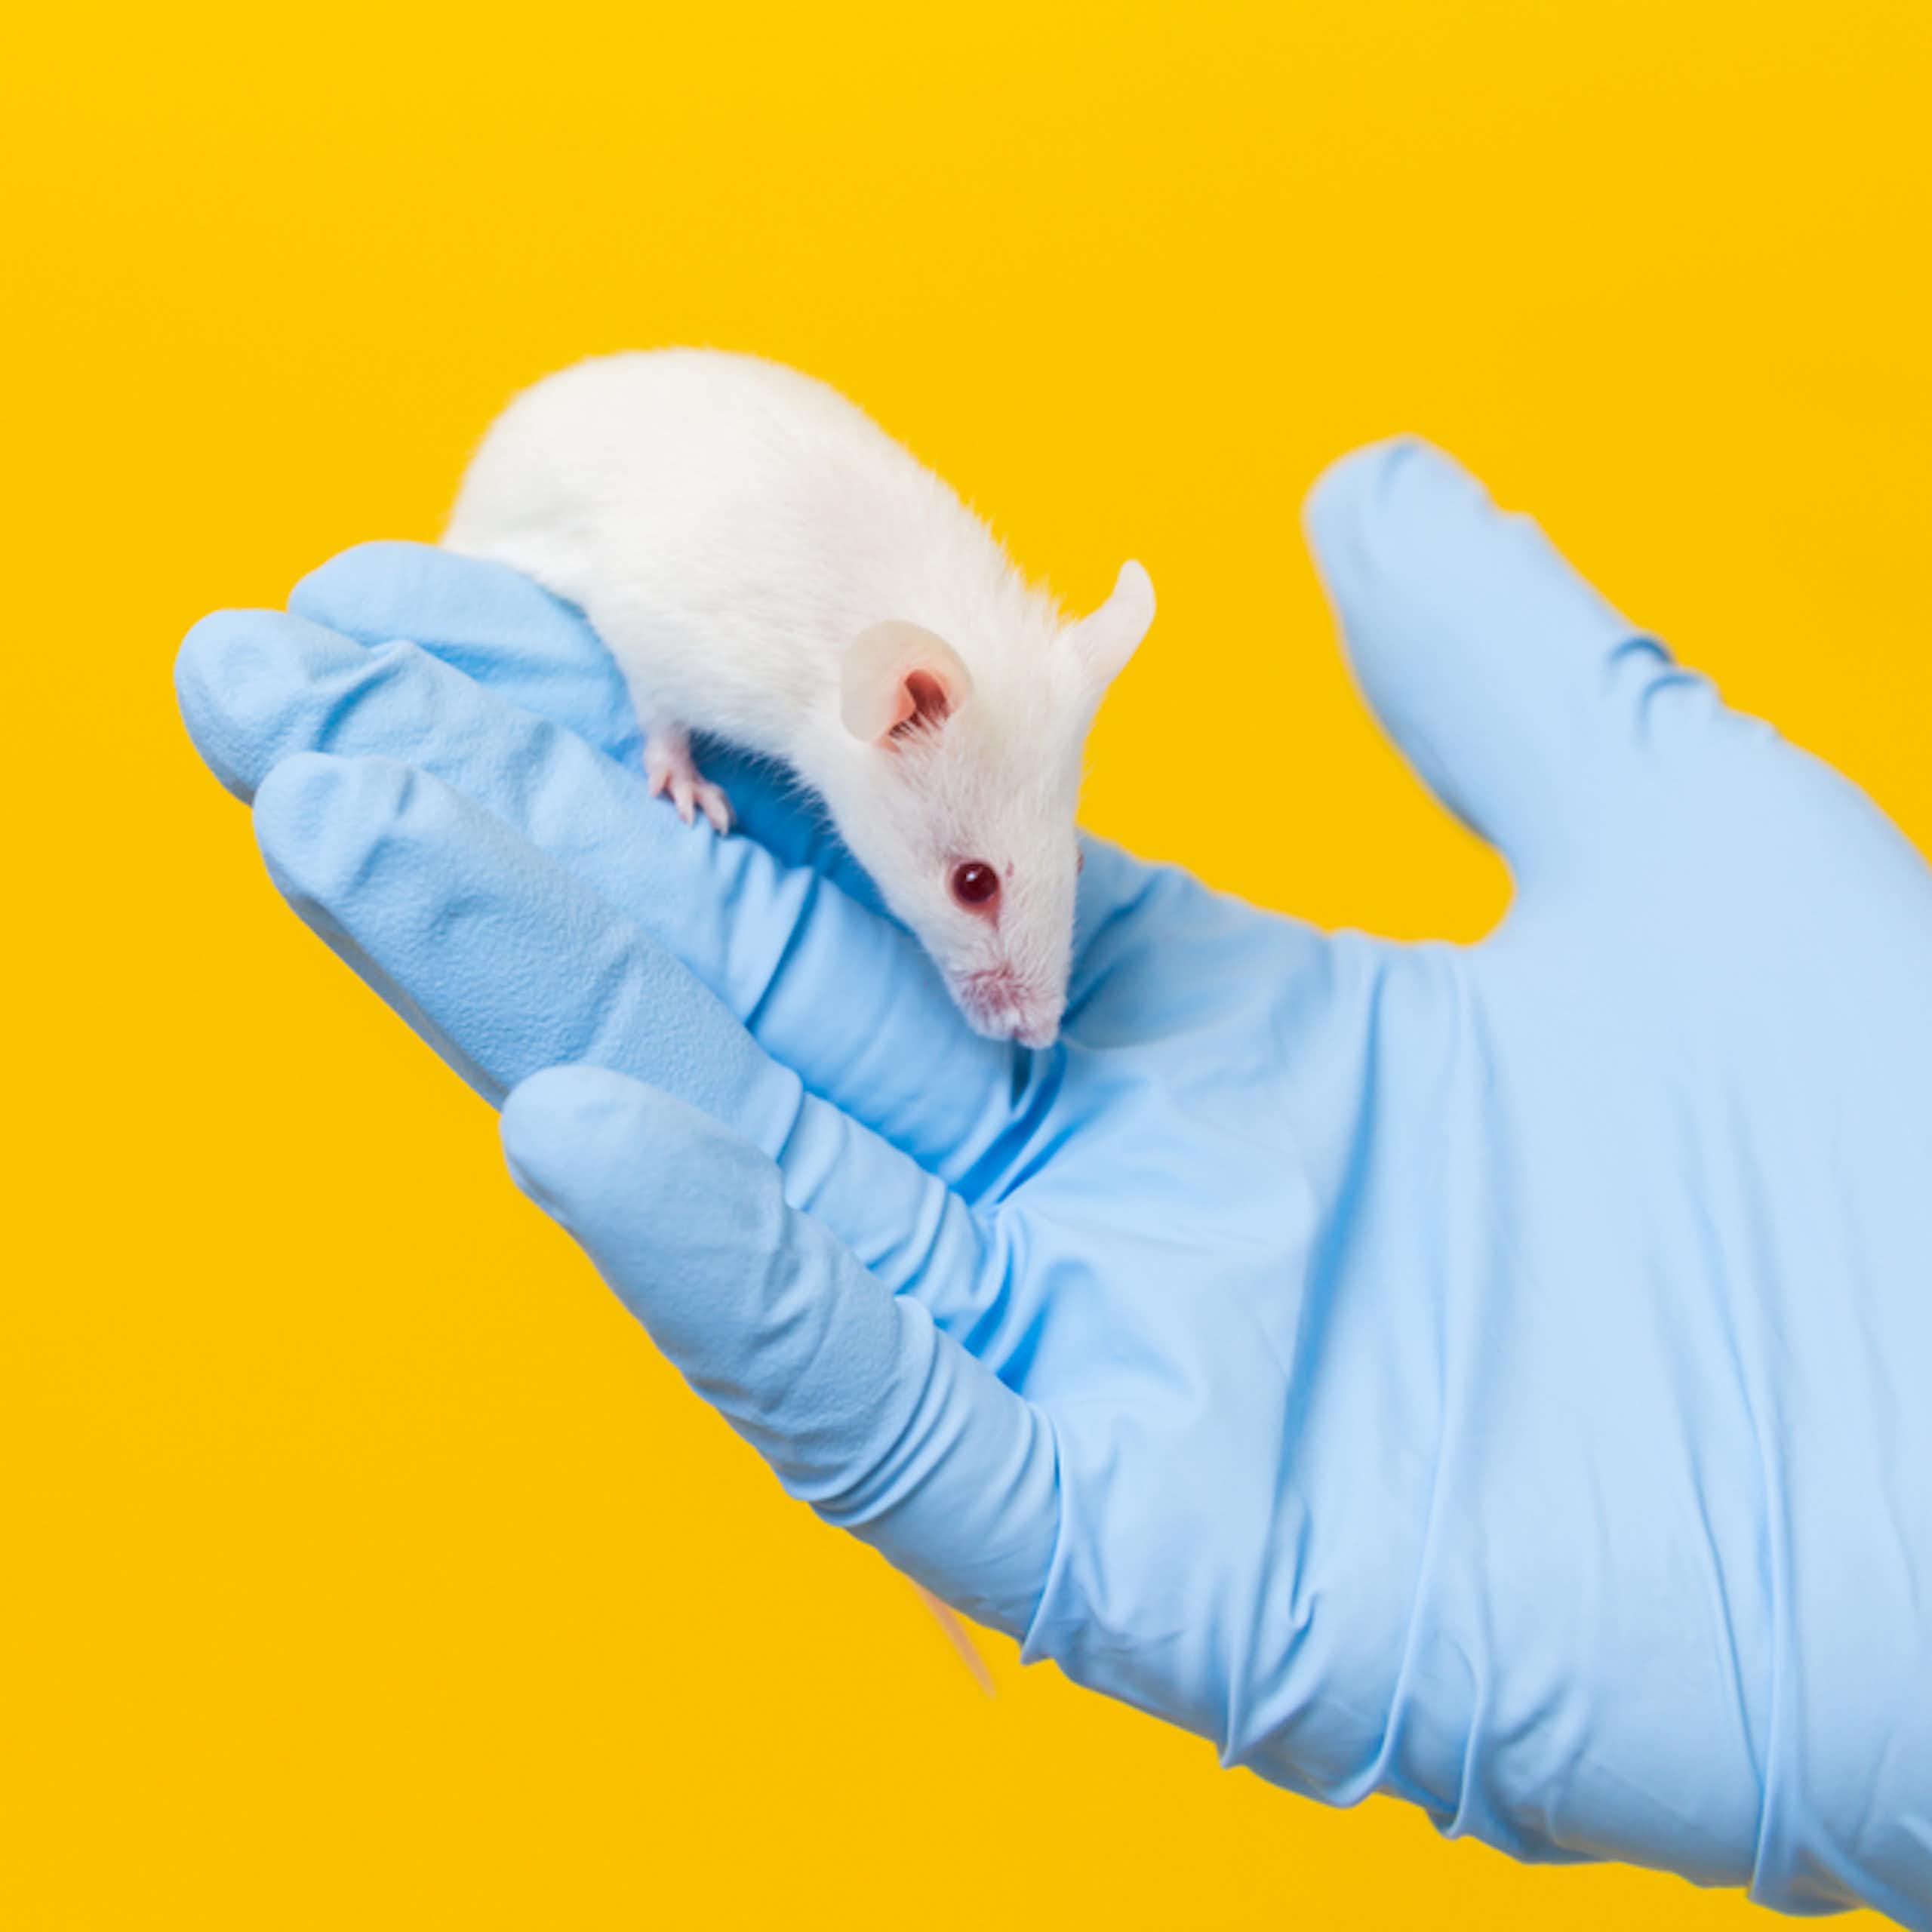 Researcher wearing blue glove holding white mouse in palm against yellow background